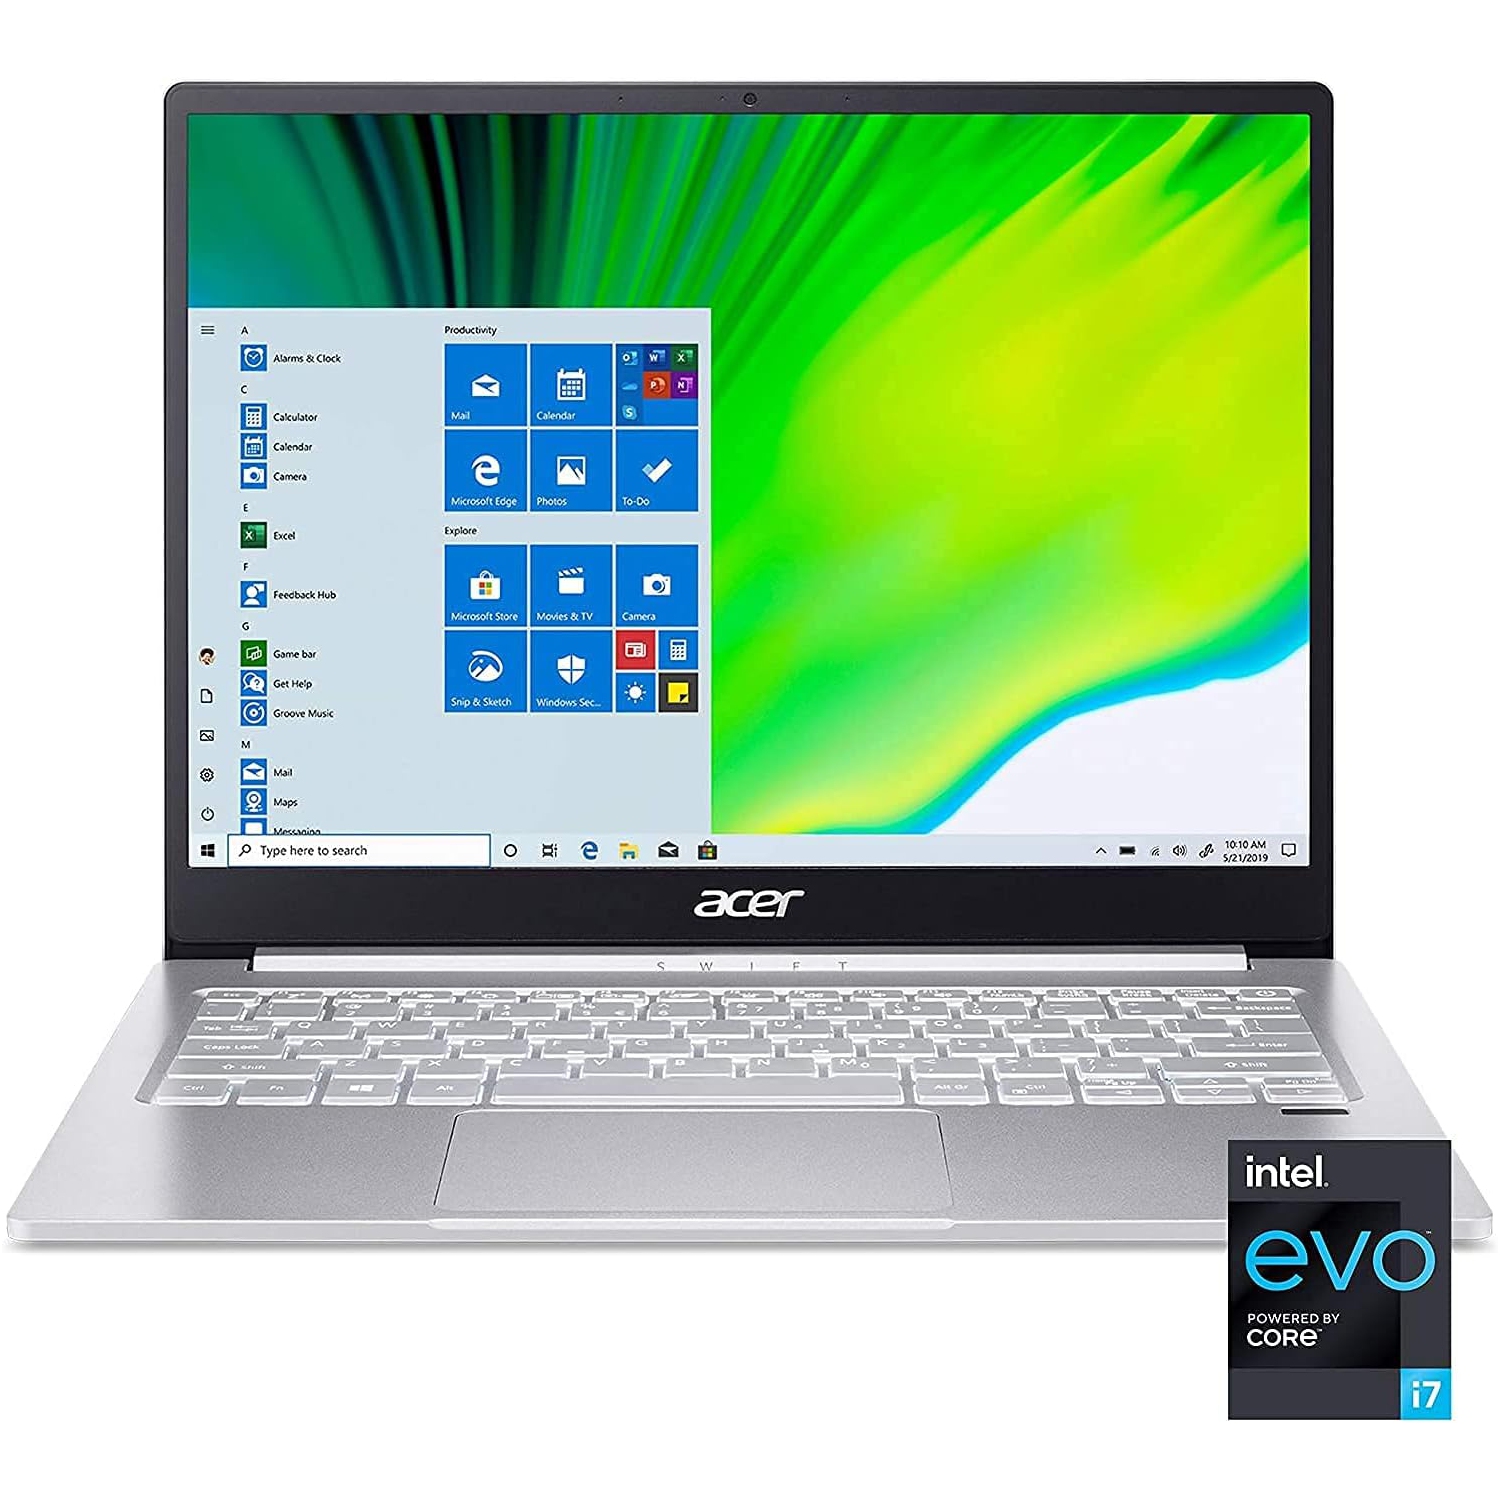 Acer Swift 3 Notebook 13.5" "(2256 x 1504) Intel I7-1165G7 16GB 512GB Window 10 Home Refurbished Excellent